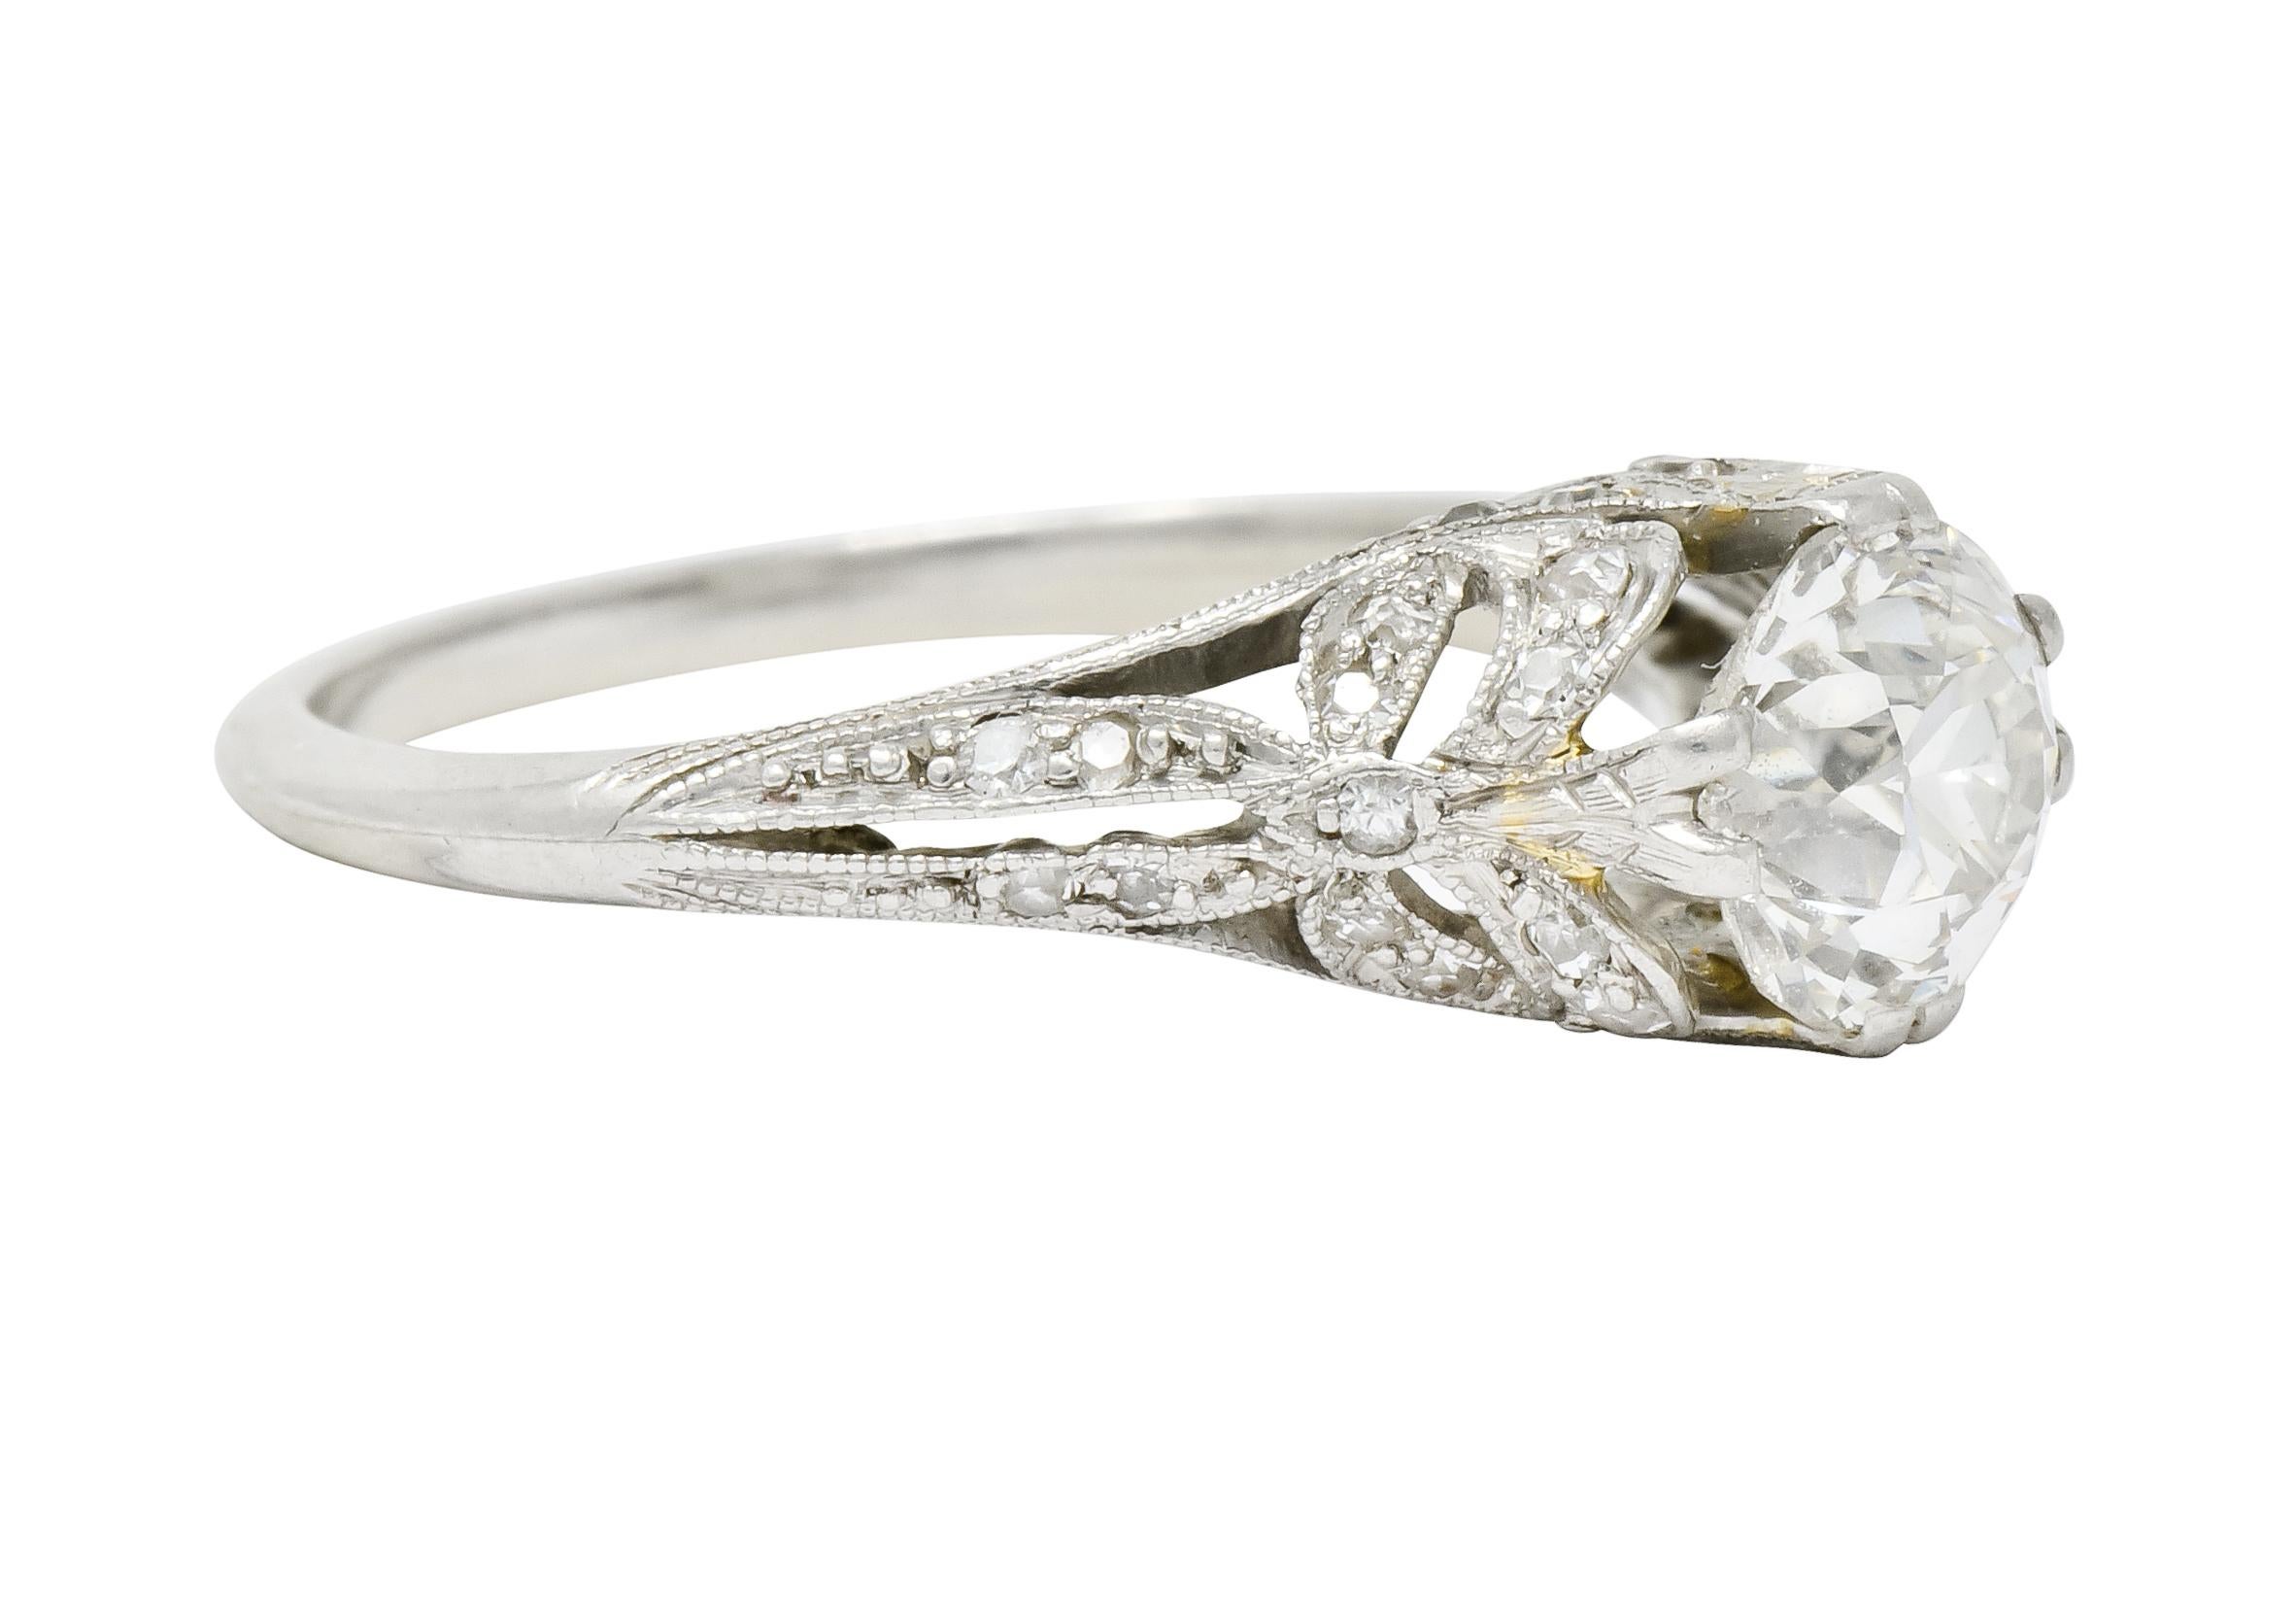 Centering on old European cut diamond weighing approximately 1.02 carat, J color with VS clarity

Set by lovely decorative split prongs of pierced milgrain mounting with stylized bow motif shoulders

Accented throughout by old mine cut diamonds